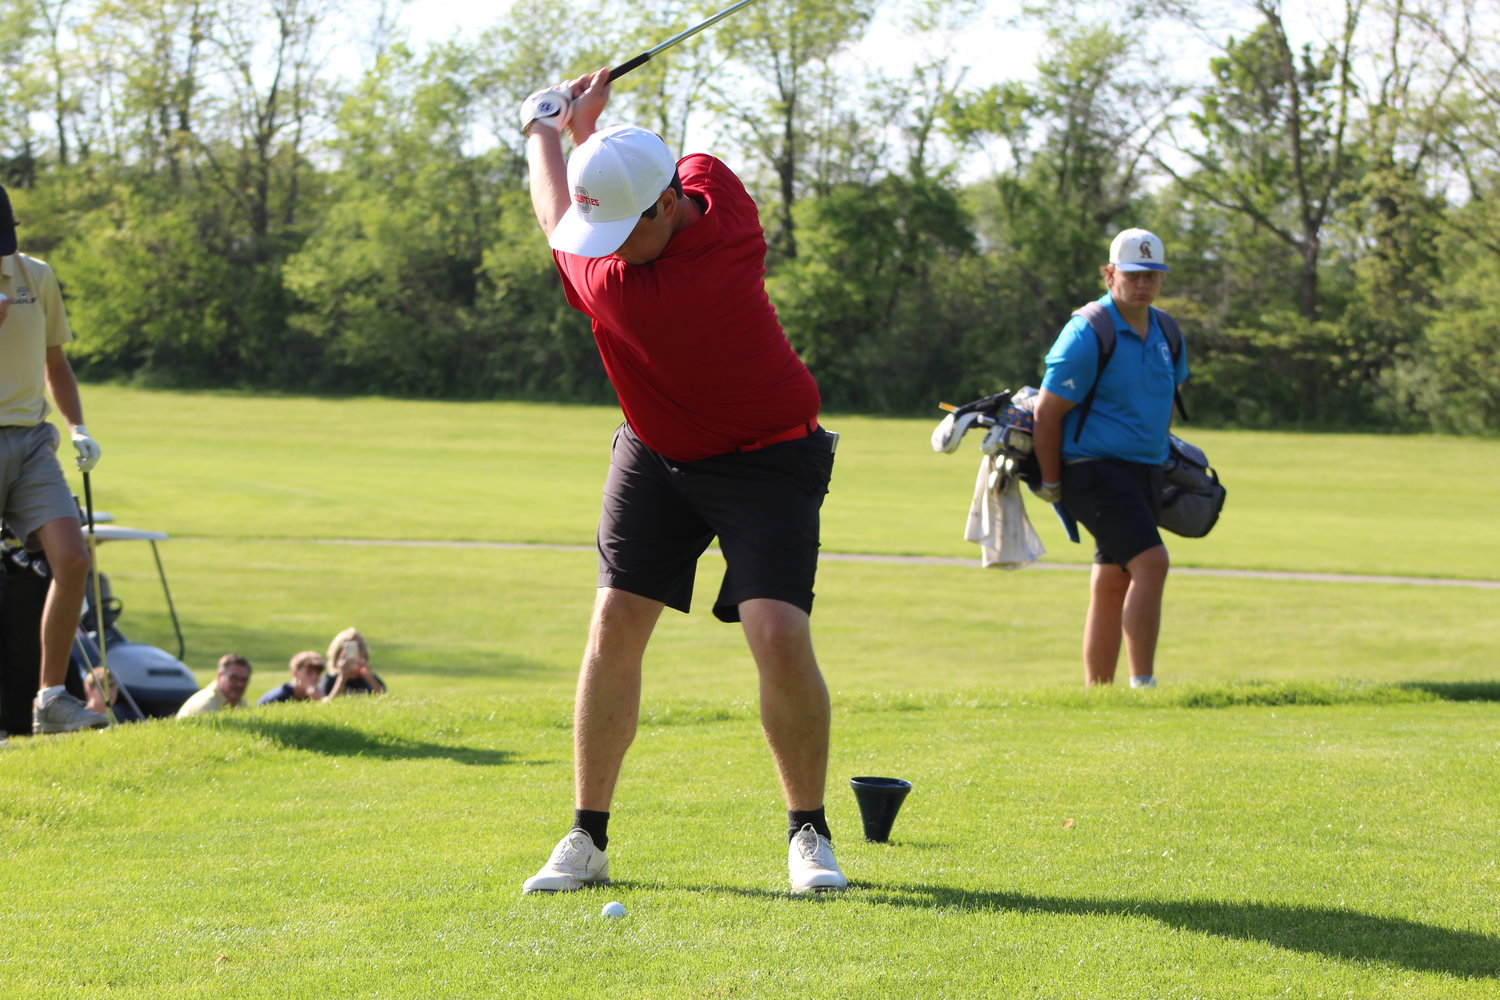 Southmont’s Nolan Allen earned First-Team All-Conference honors with his 80 at the Conference Meet on Monday. He helped the Mounties earn a third place finish overall.